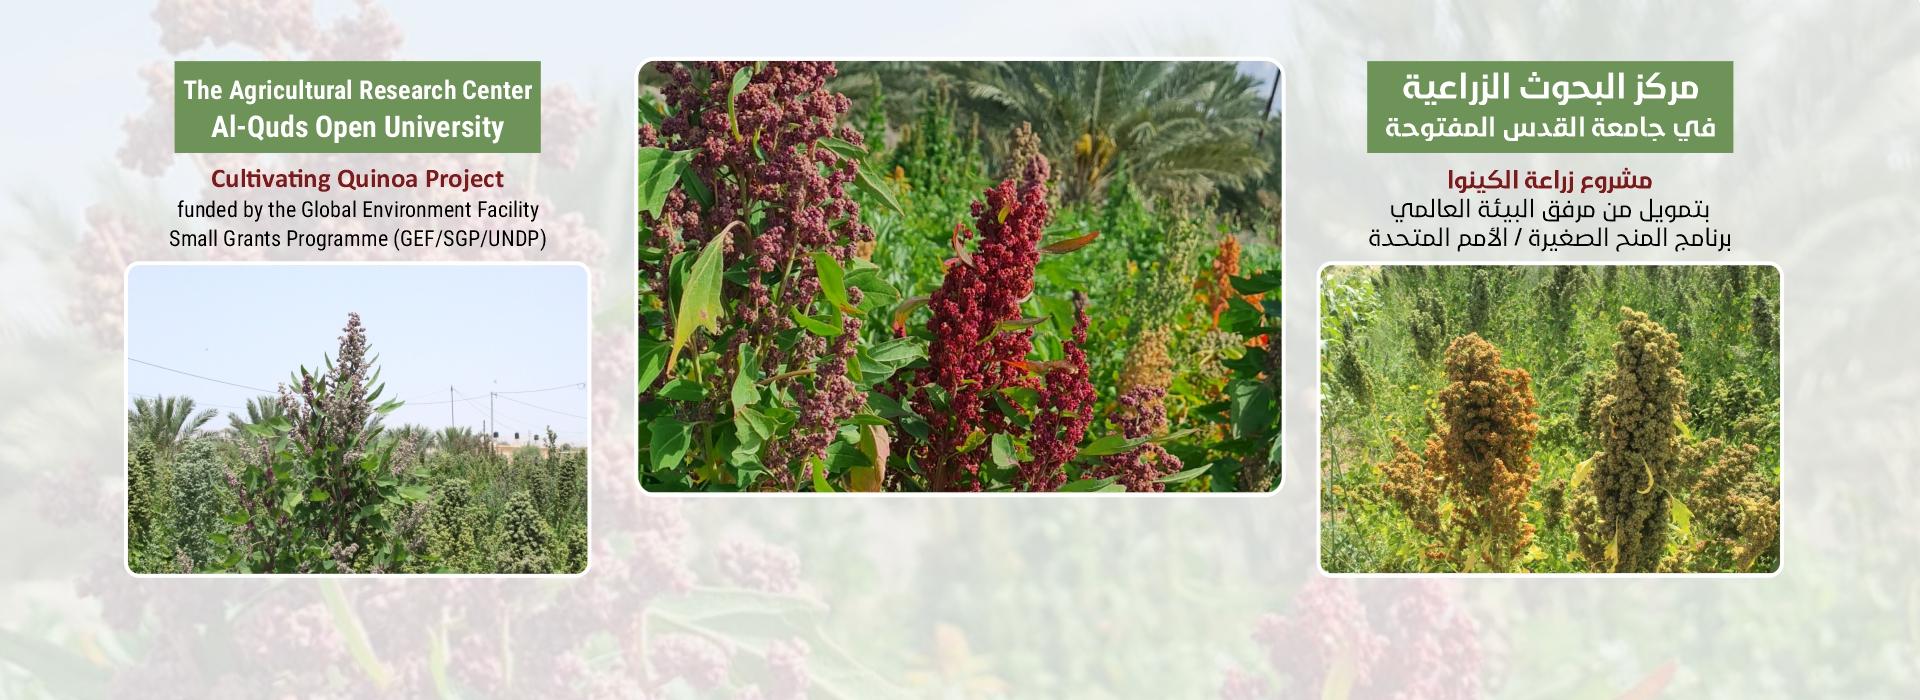 Quinoa Cultivation to Adapt to Climate Change in Palestine